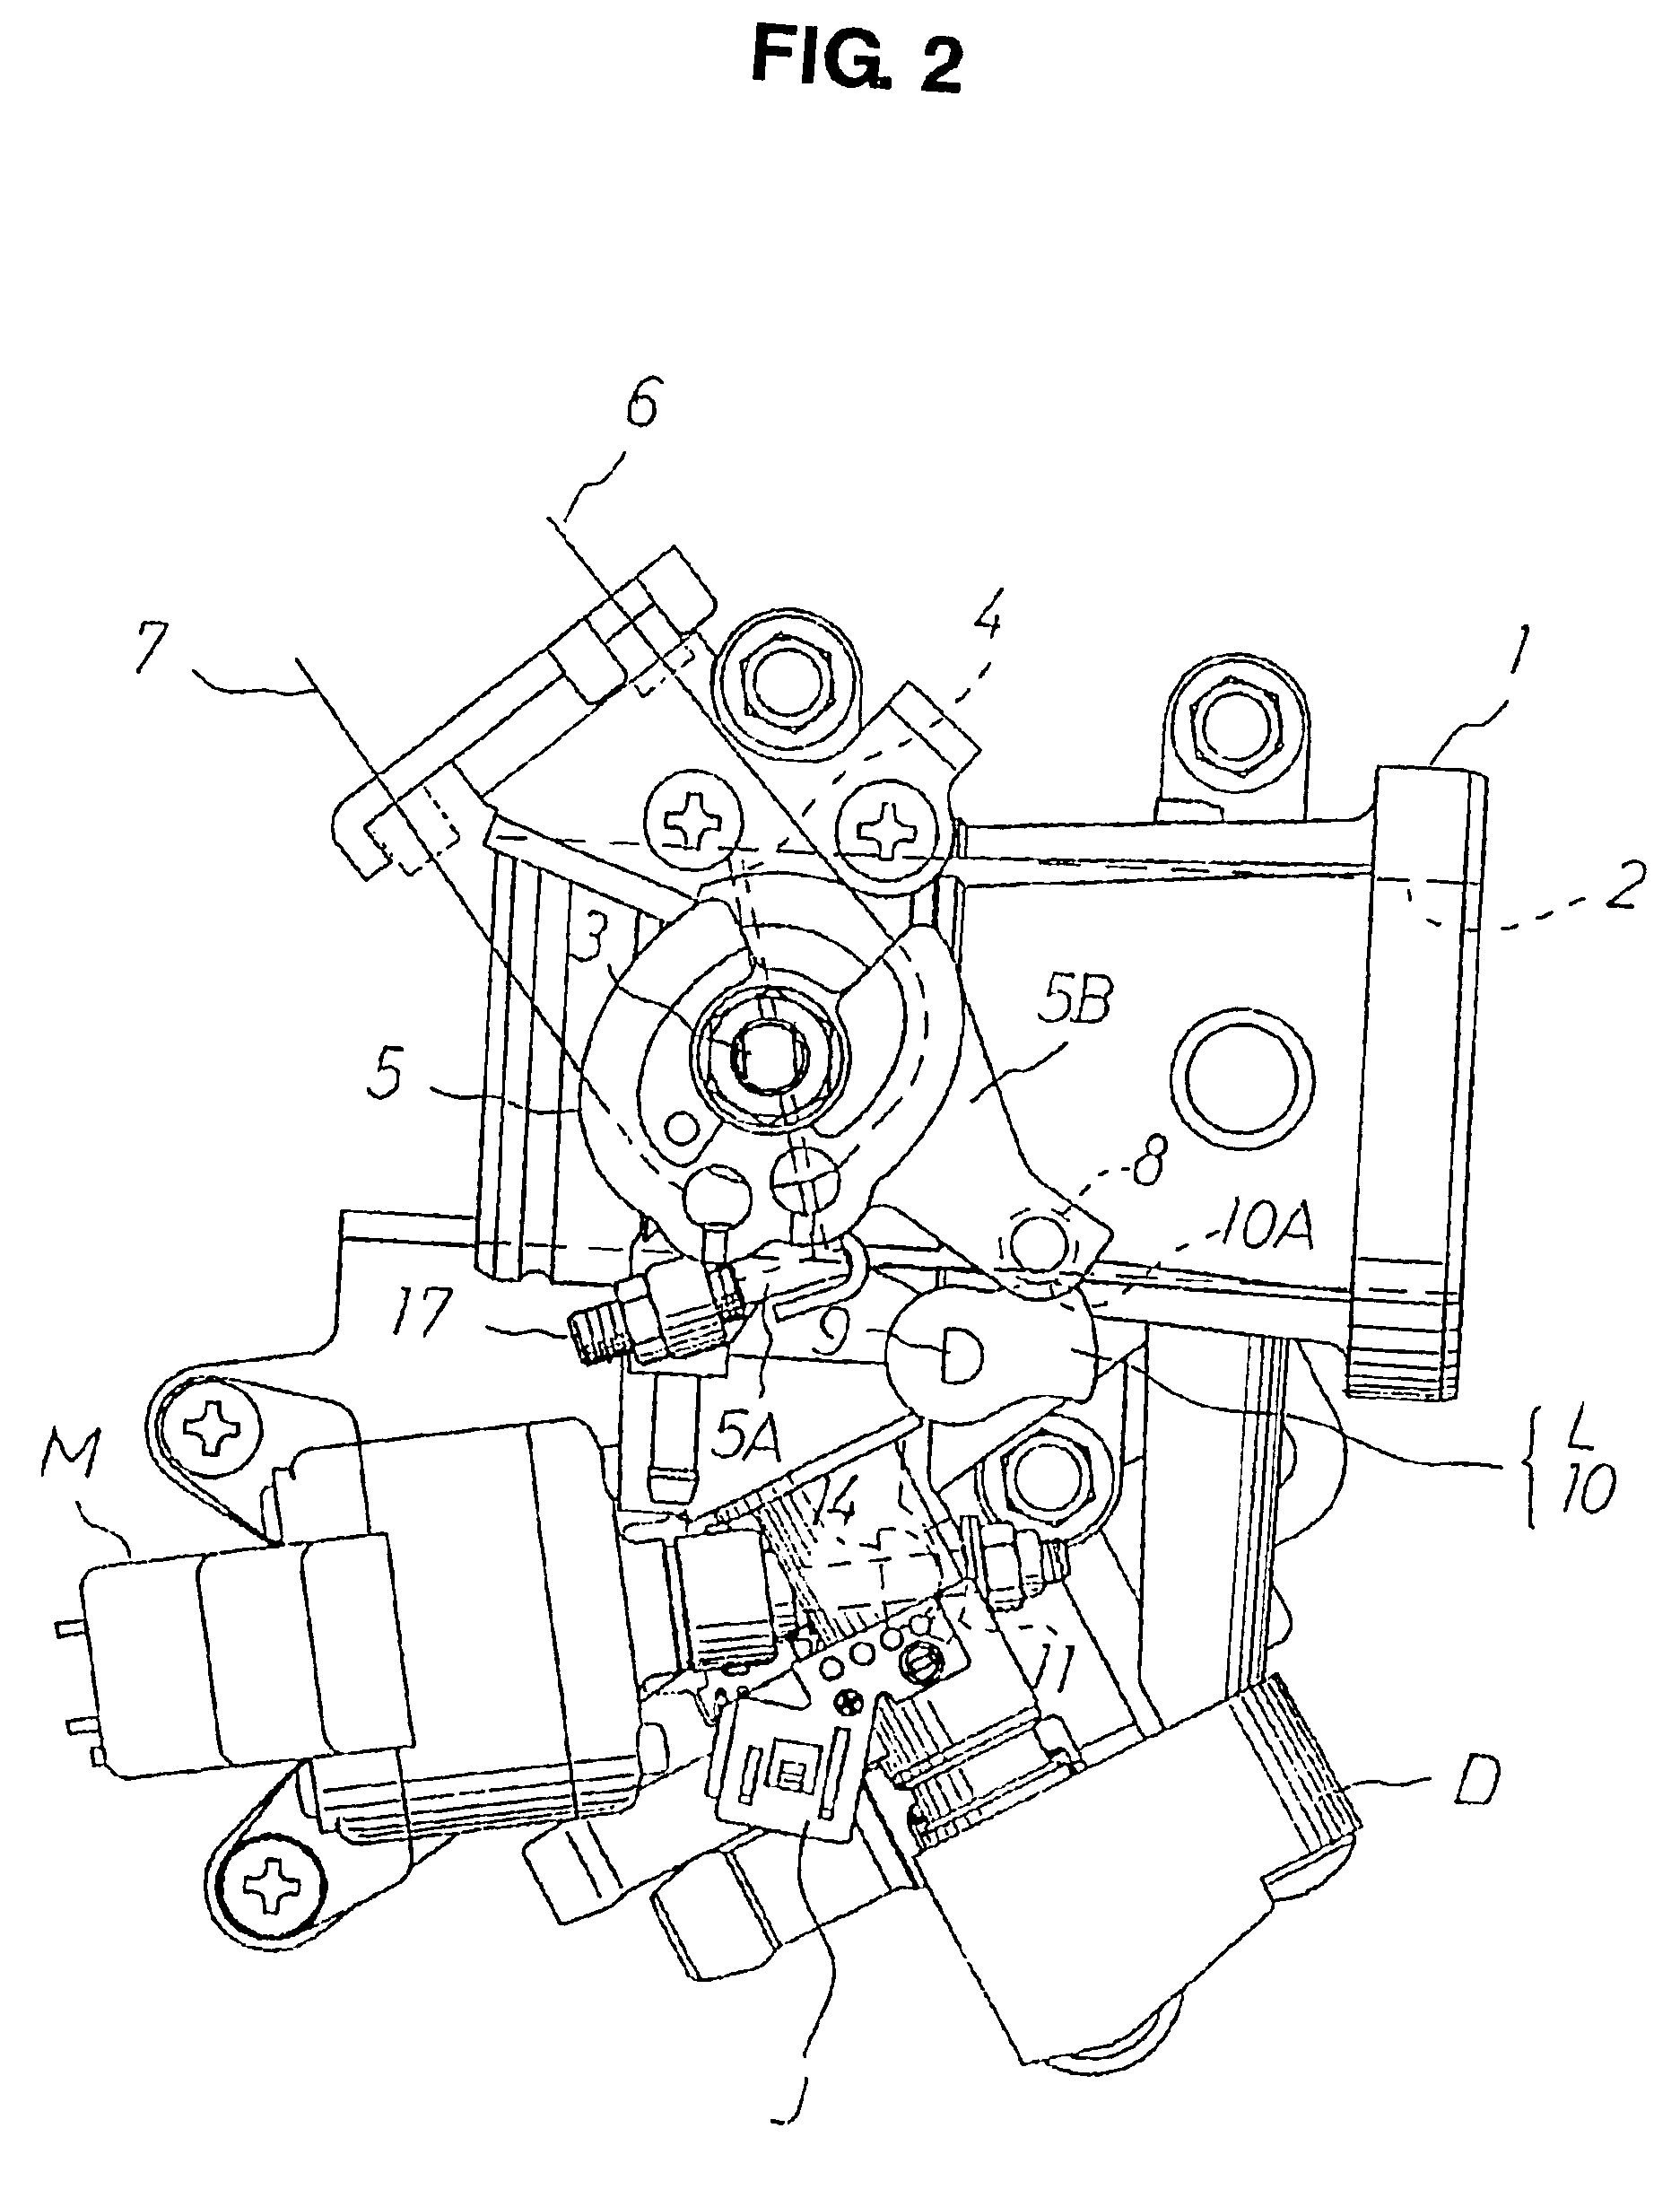 Idle speed control apparatus in throttle body